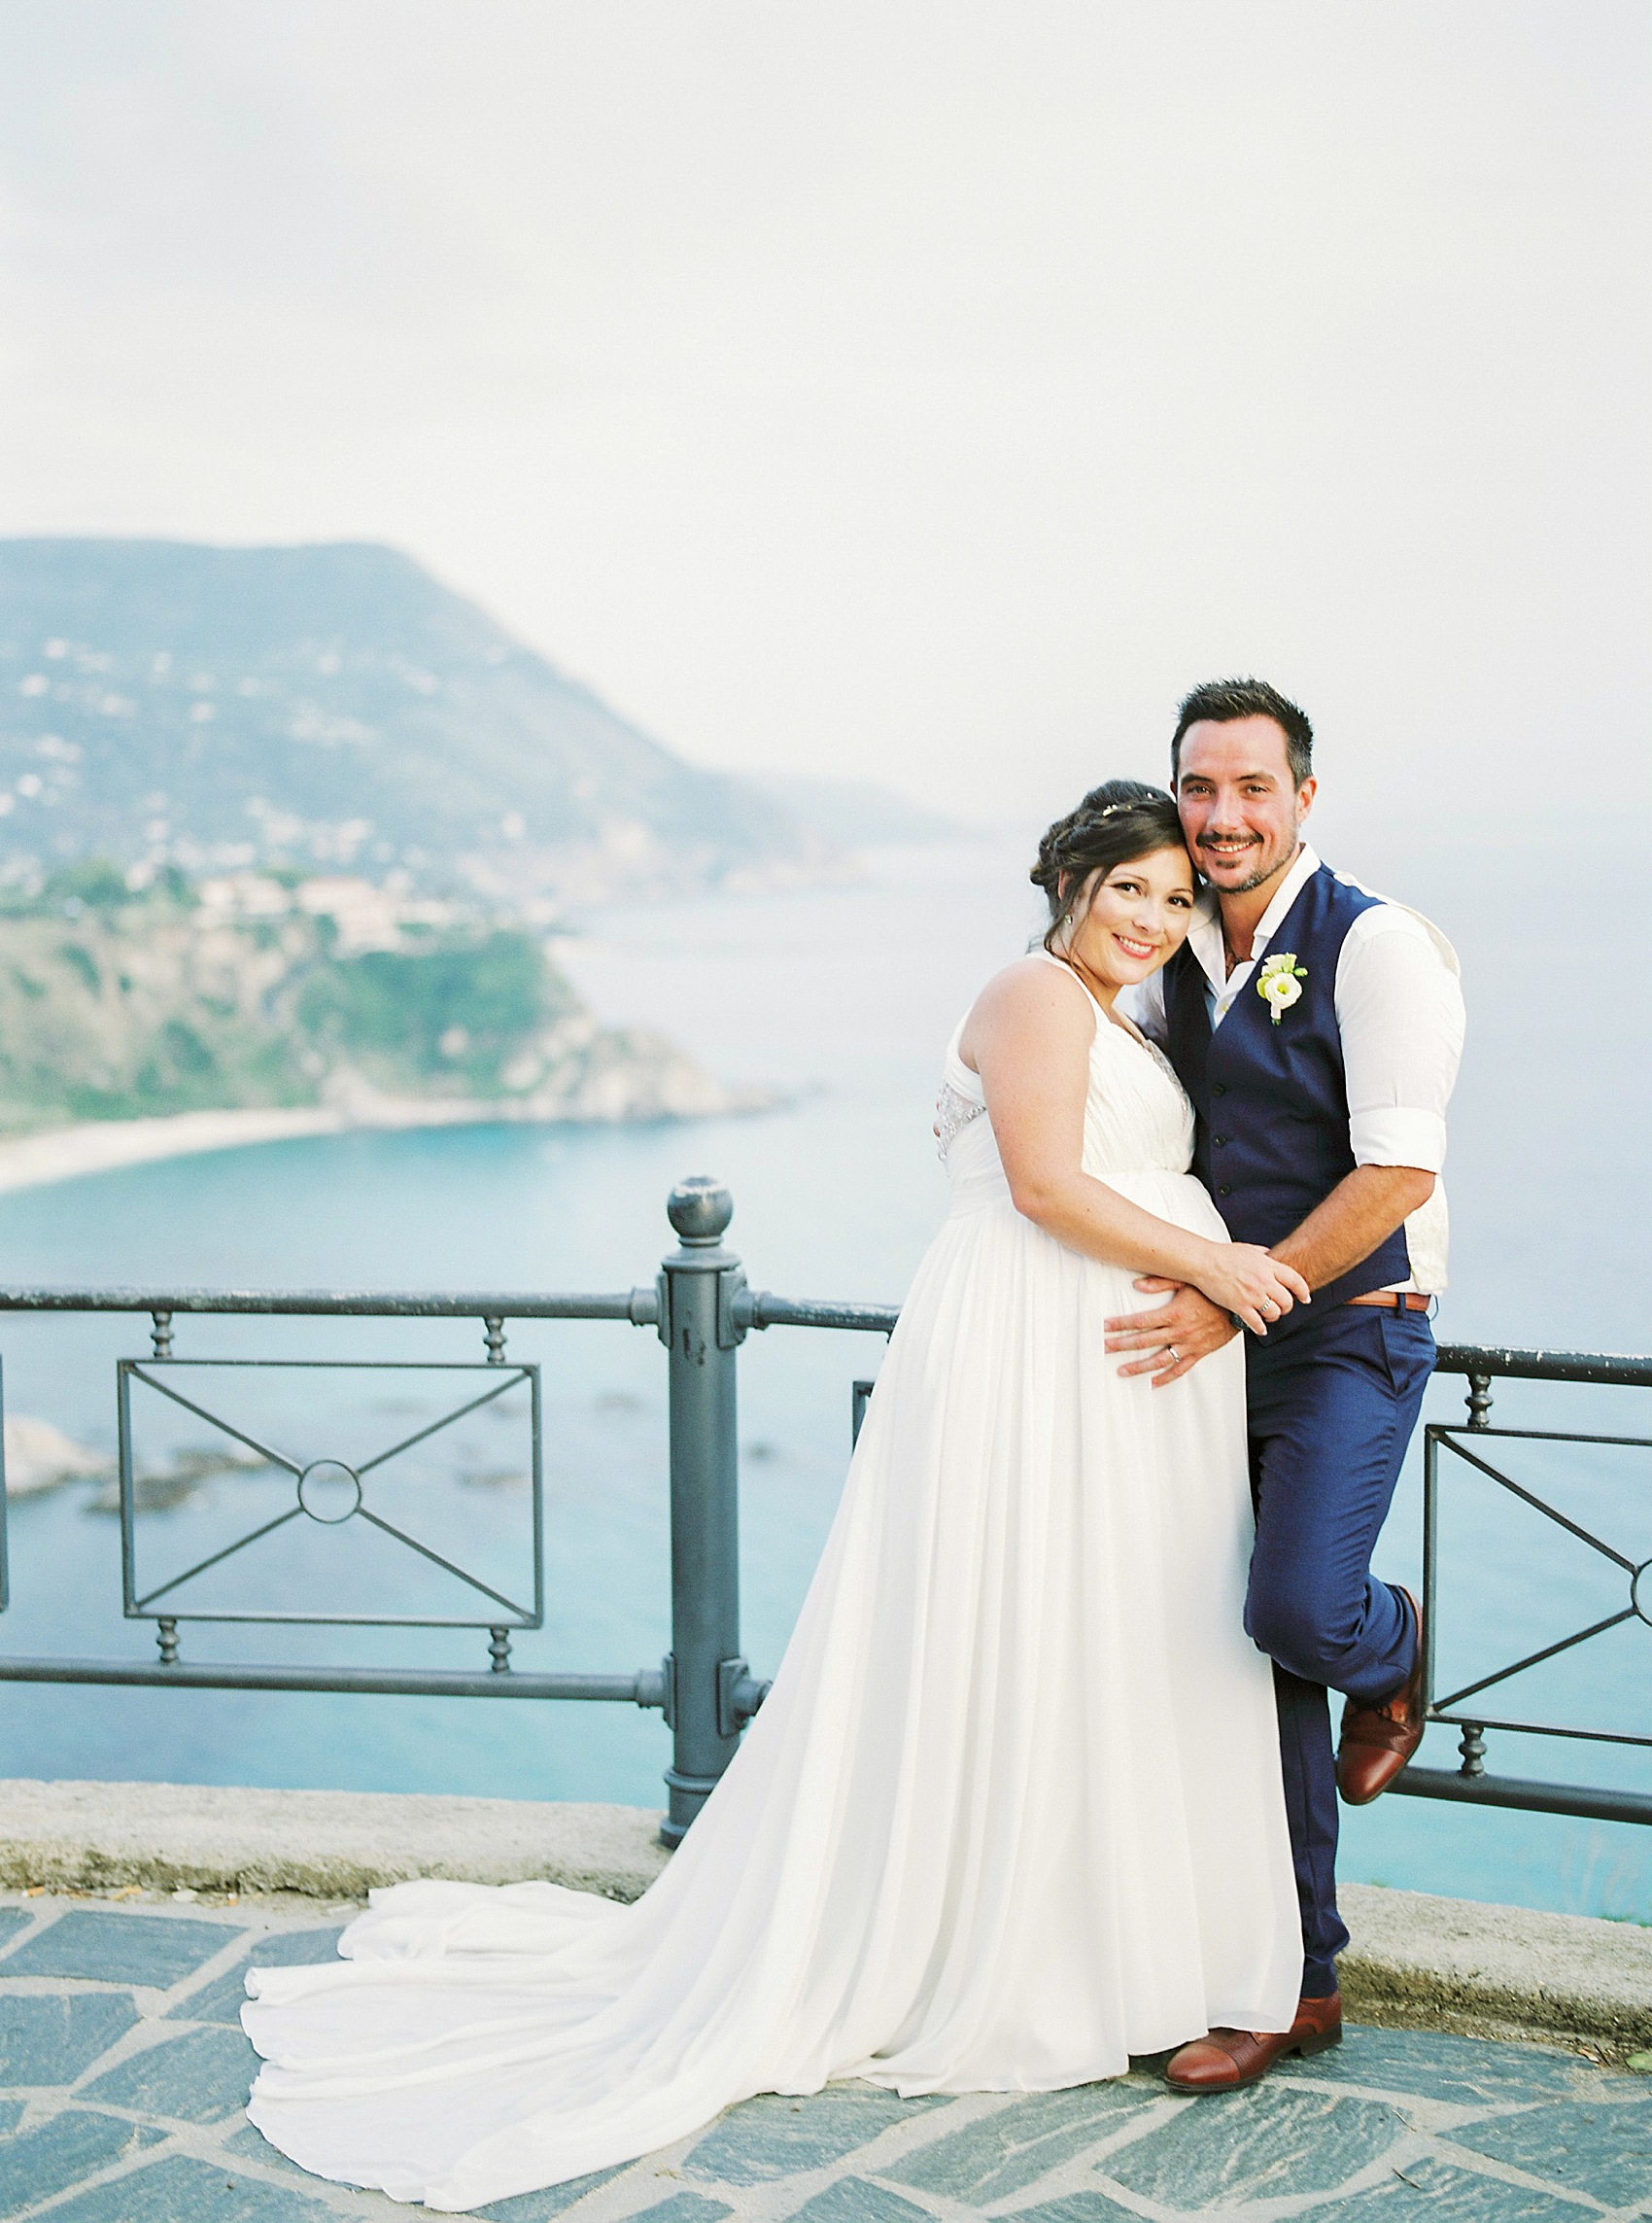 Pregnant bride Il Faro Wedding Italy  - A Spectacular Cliff-Top + Sea View Wedding at Il Faro in Italy, with a Pregnant Bride in a Grecian Inspired Dress